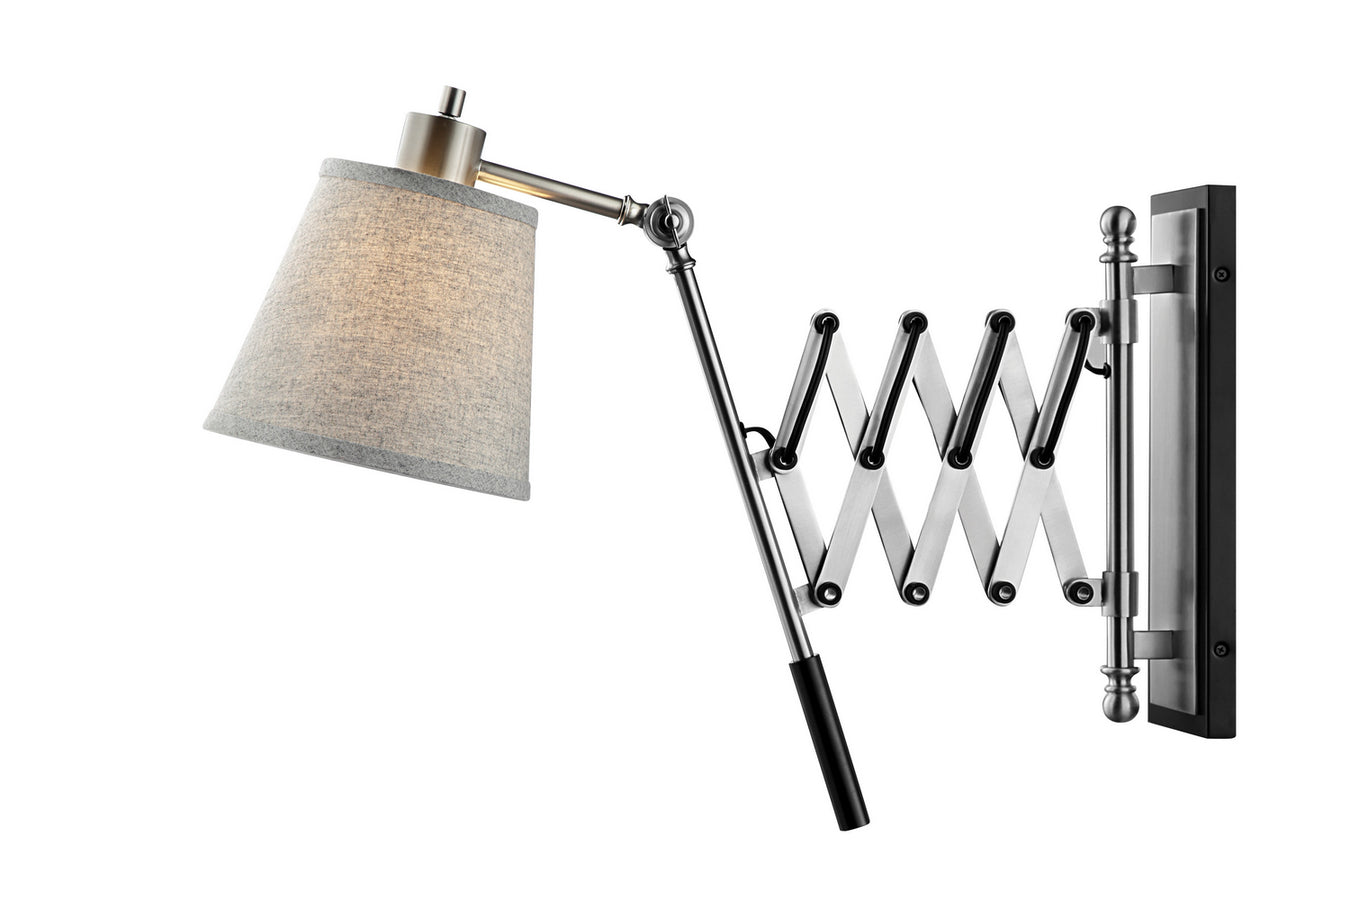 Caprilla Extendable Wall Sconce in Brushed Nickel with-Light Grey Fabric Shade, E27 A 40W